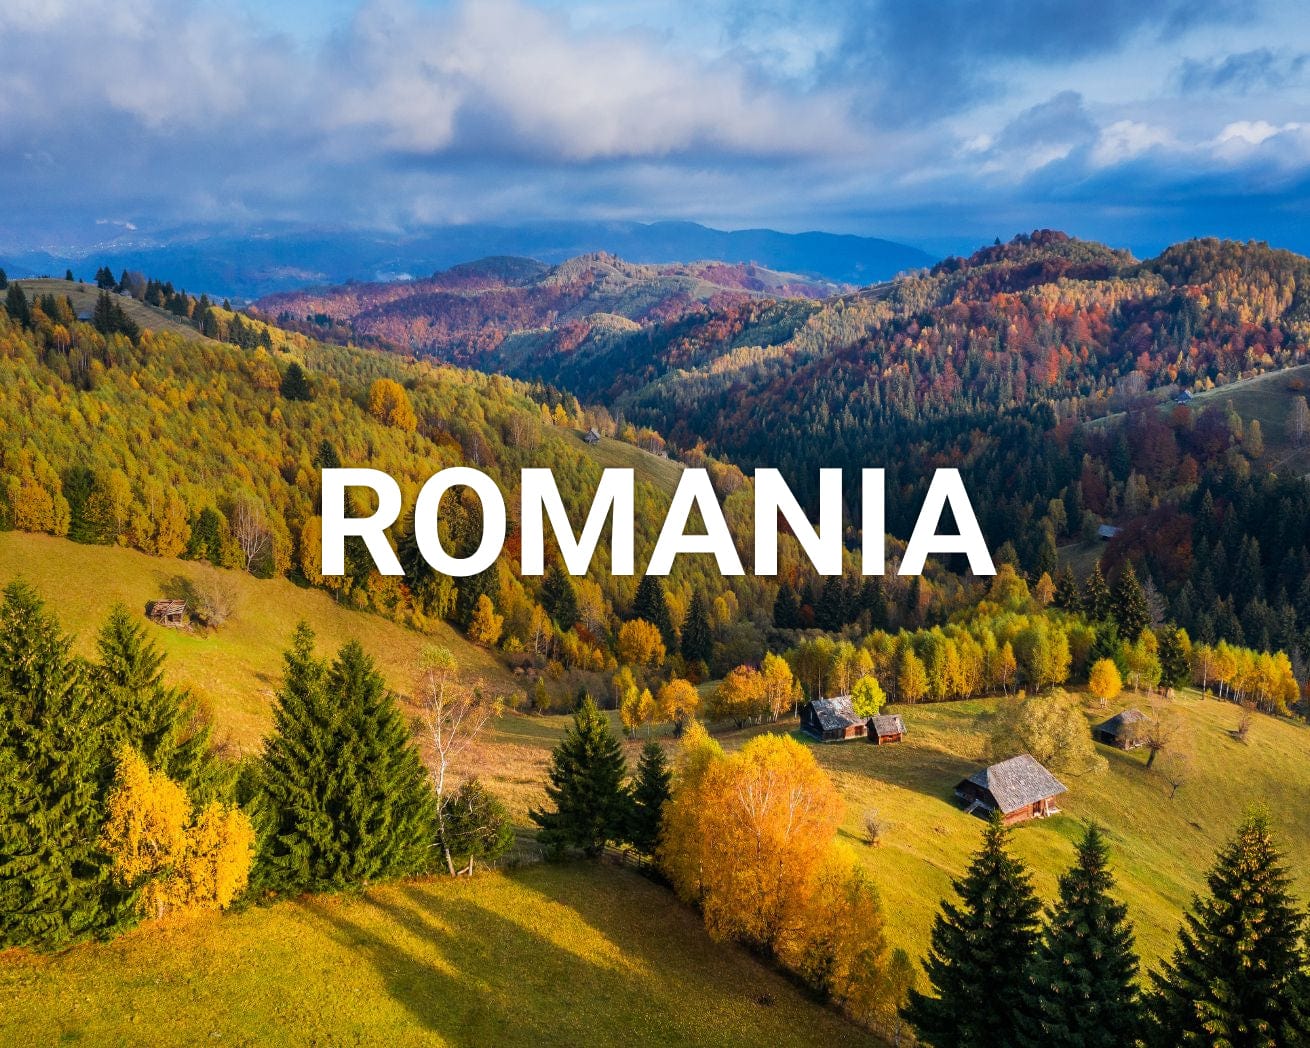 Romania title card of colorful forested mountains